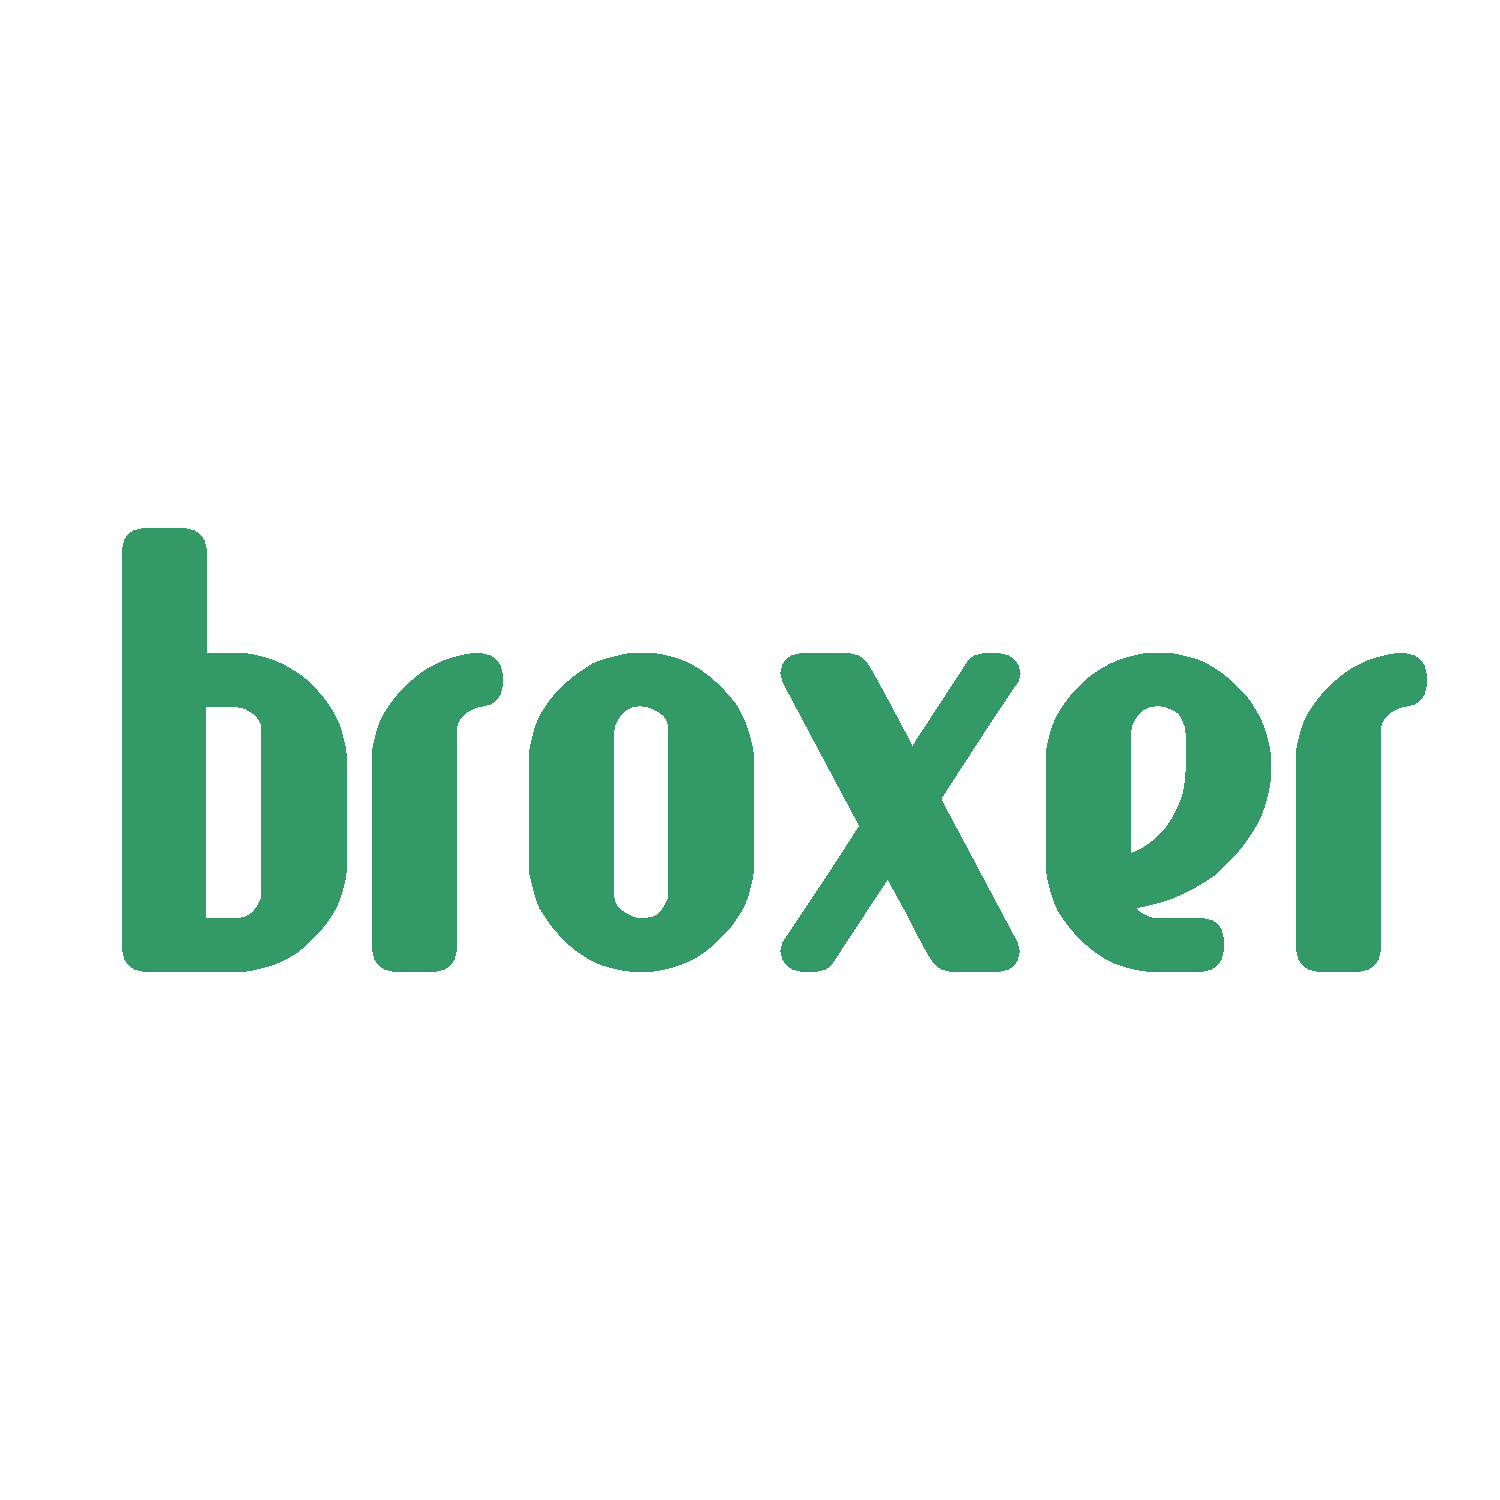 Broxer - Freelancing & MicroJobs Services